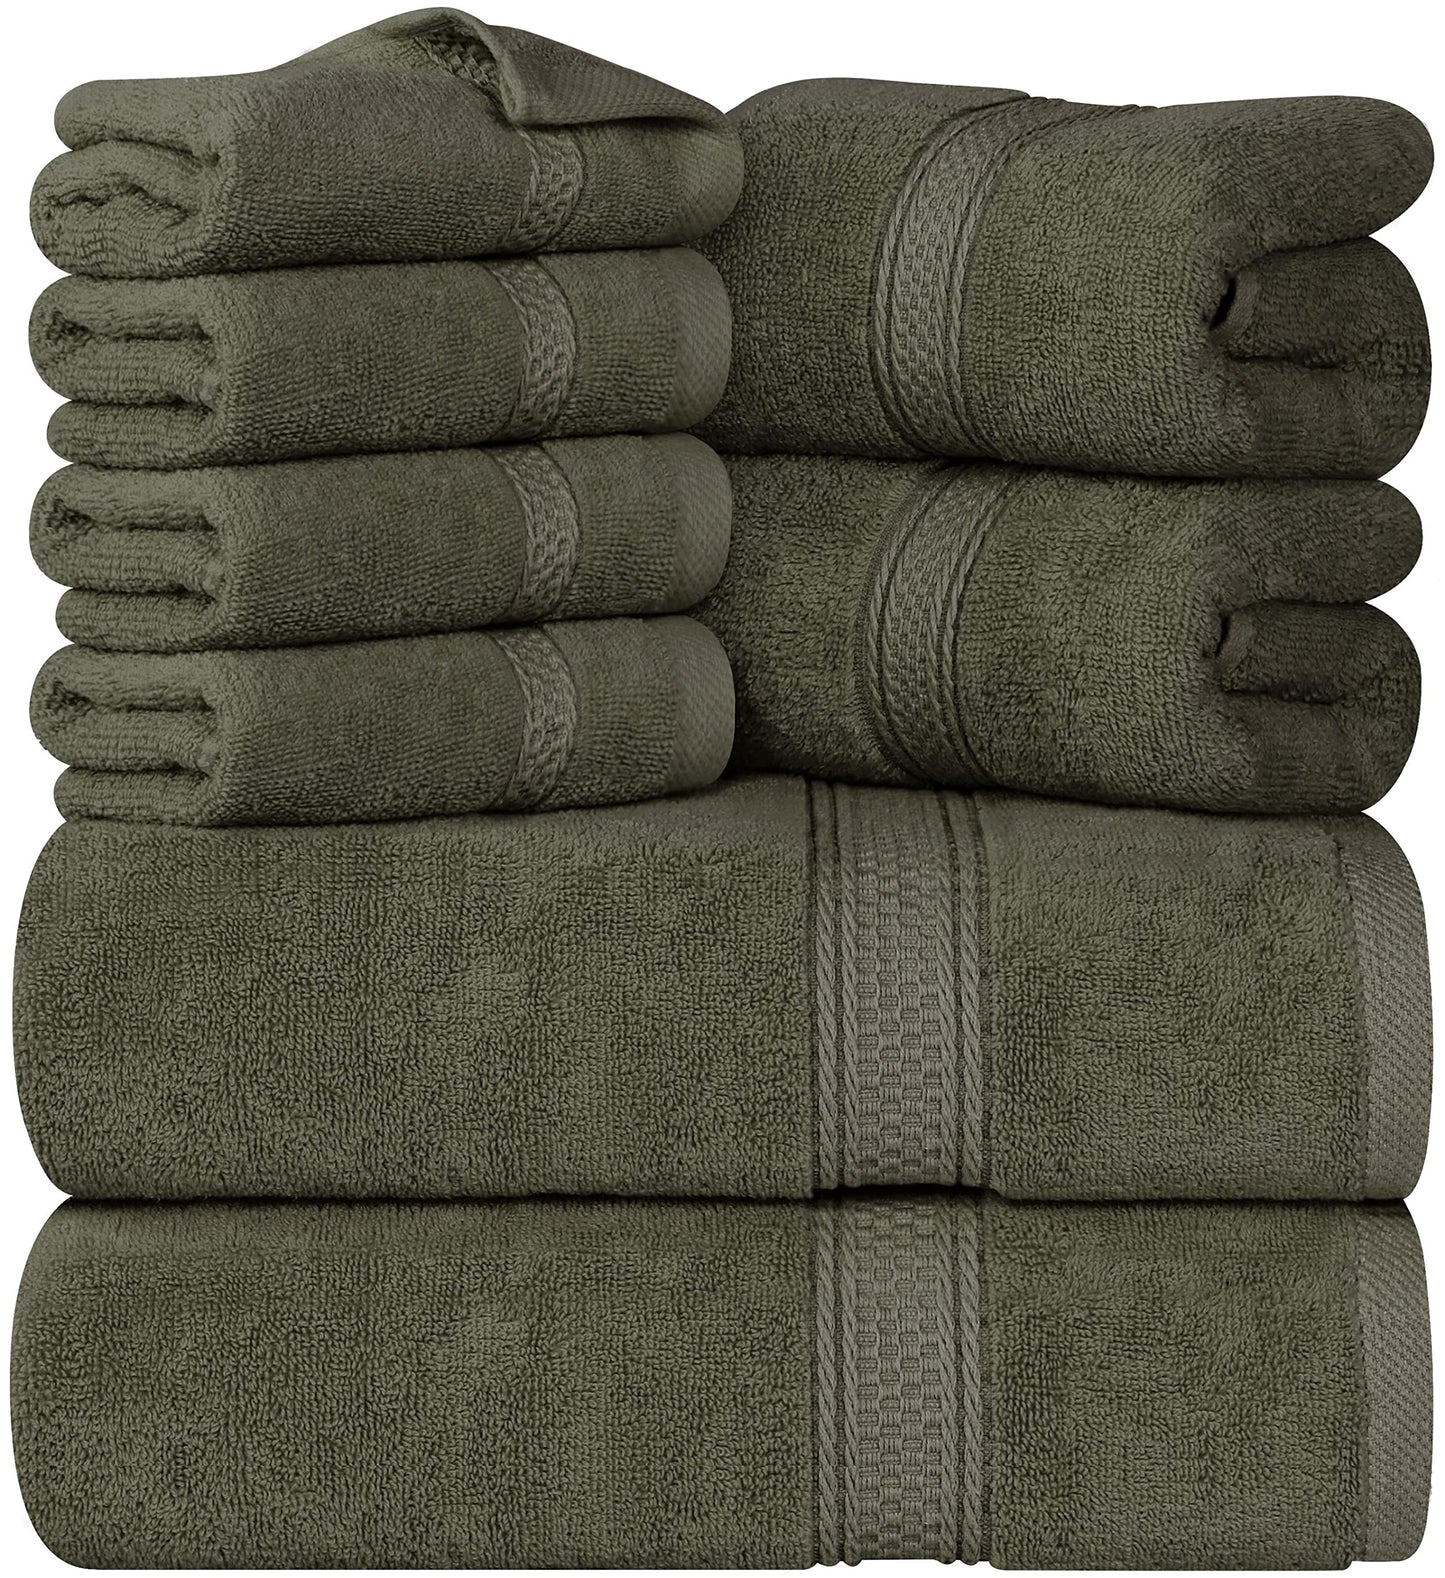 Utopia Towels 8-Piece Premium Towel Set, 2 Bath Towels, 2 Hand Towels, and 4 Wash Cloths, 600 GSM 100% Ring Spun Cotton Highly Absorbent Towels for Bathroom, Gym, Hotel, and Spa (Dusty Olive)